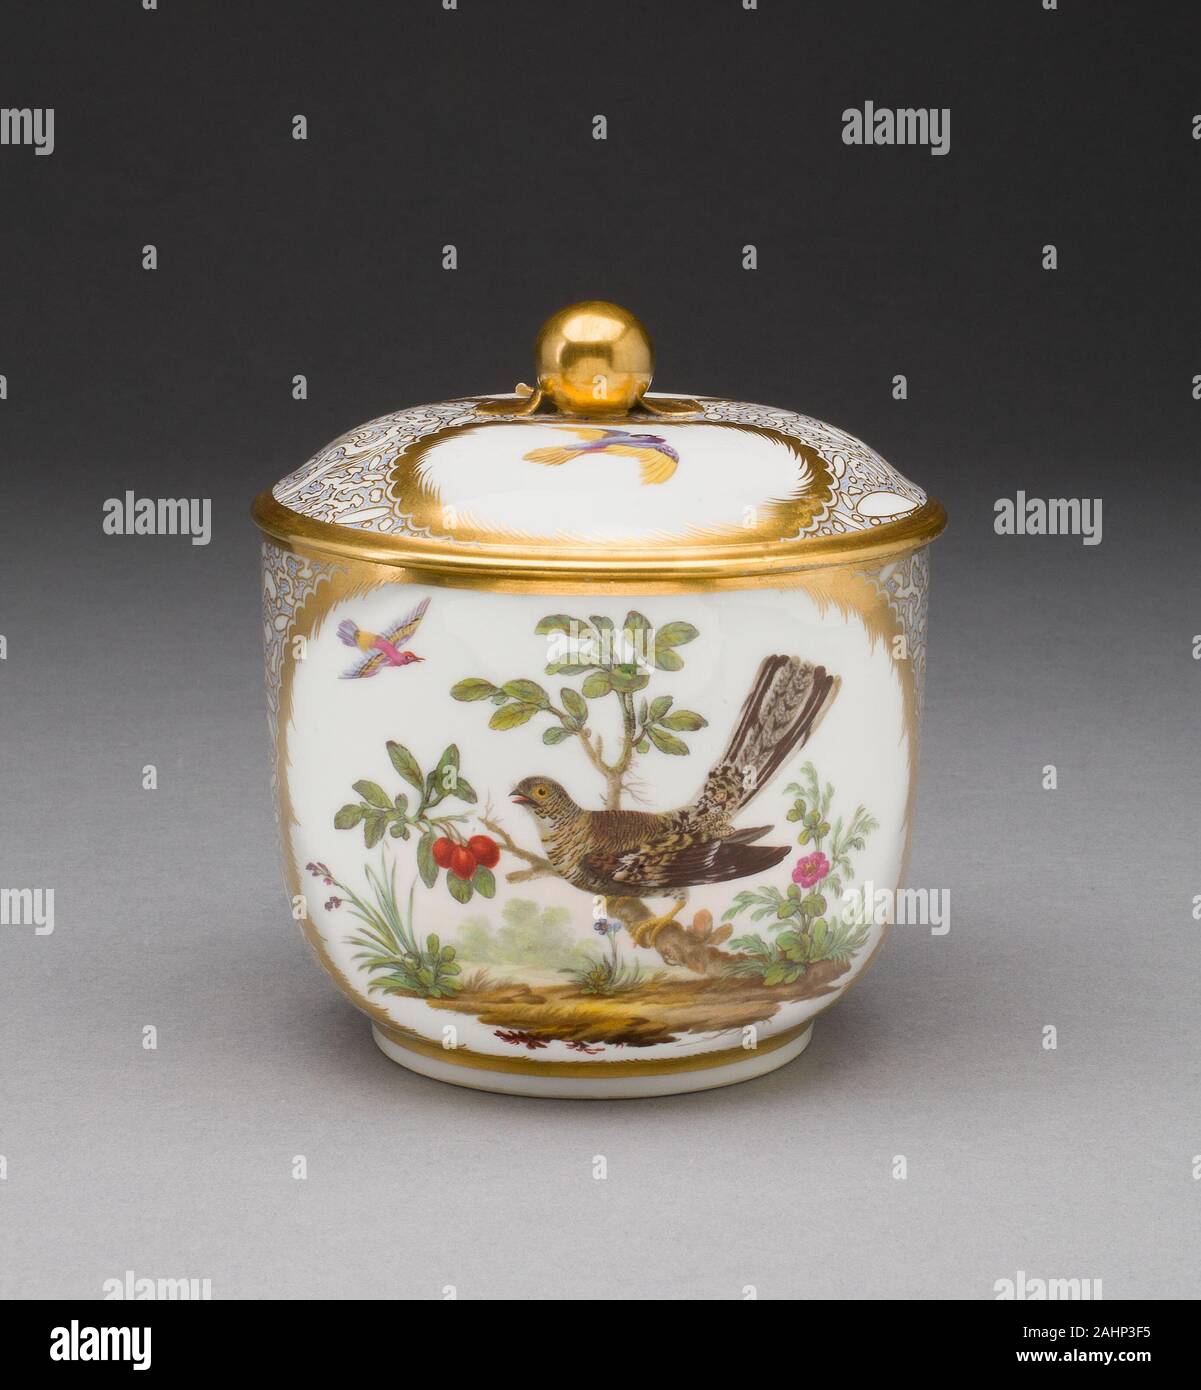 Manufacture nationale de Sèvres (Manufacturer). Sugar Bowl. 1781. Sèvres. Hard-paste porcelain, polychrome enamels, gilding Bird painting has always been popular at Sèvres. The birds (oiseaux) on this sugar bowl are drawn from engravings in Histoire naturelle des oiseaux, an 18th-century natural history treatise by the French naturalist Georges-Louis Leclerc, comte de Buffon (1707–1788). These engravings were first used as source material at Sèvres in 1781. Stock Photo